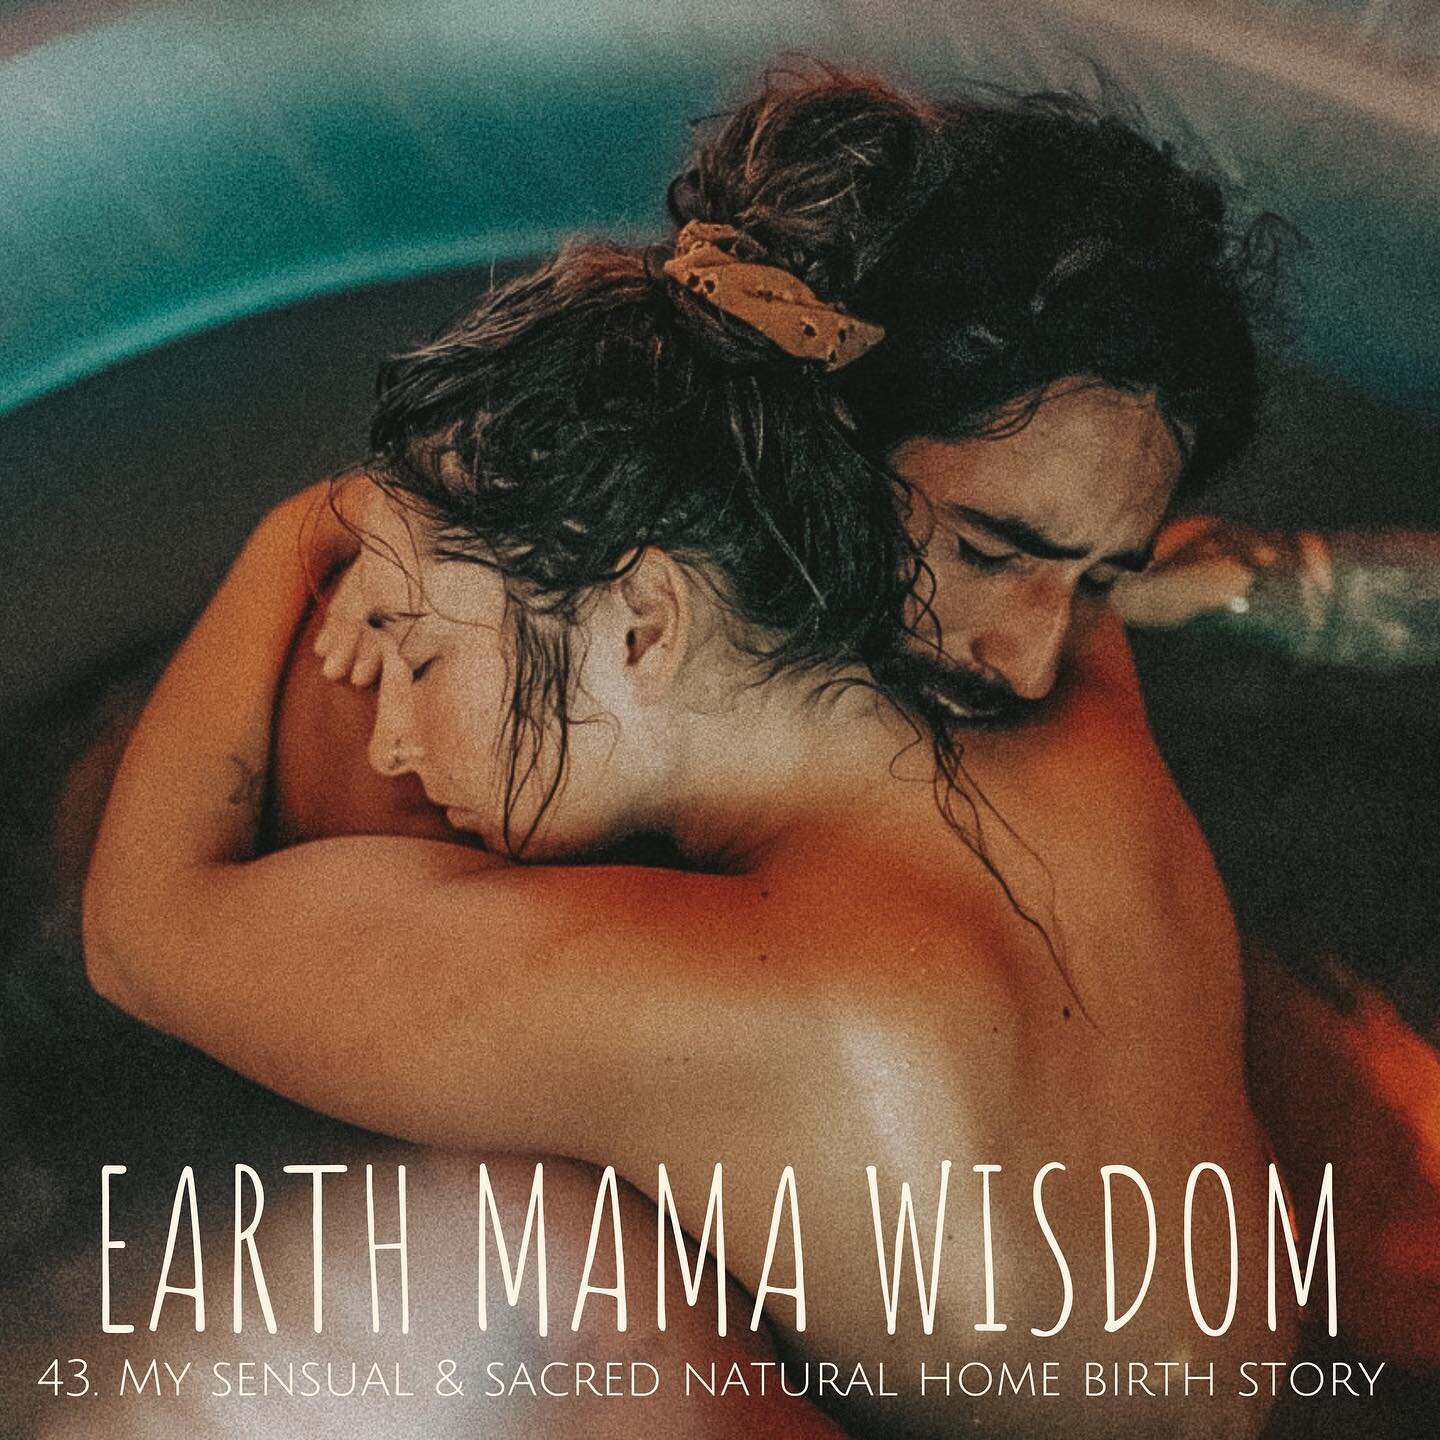 Episode 43. My Sensual &amp; Sacred Natural Home Birth Story, out now on Earth Mama Wisdom 🎙

Available to listen on Spotify, Apple Podcasts &amp; all other major podcast platforms 💫

In this episode, I share everything from choosing my home birth 